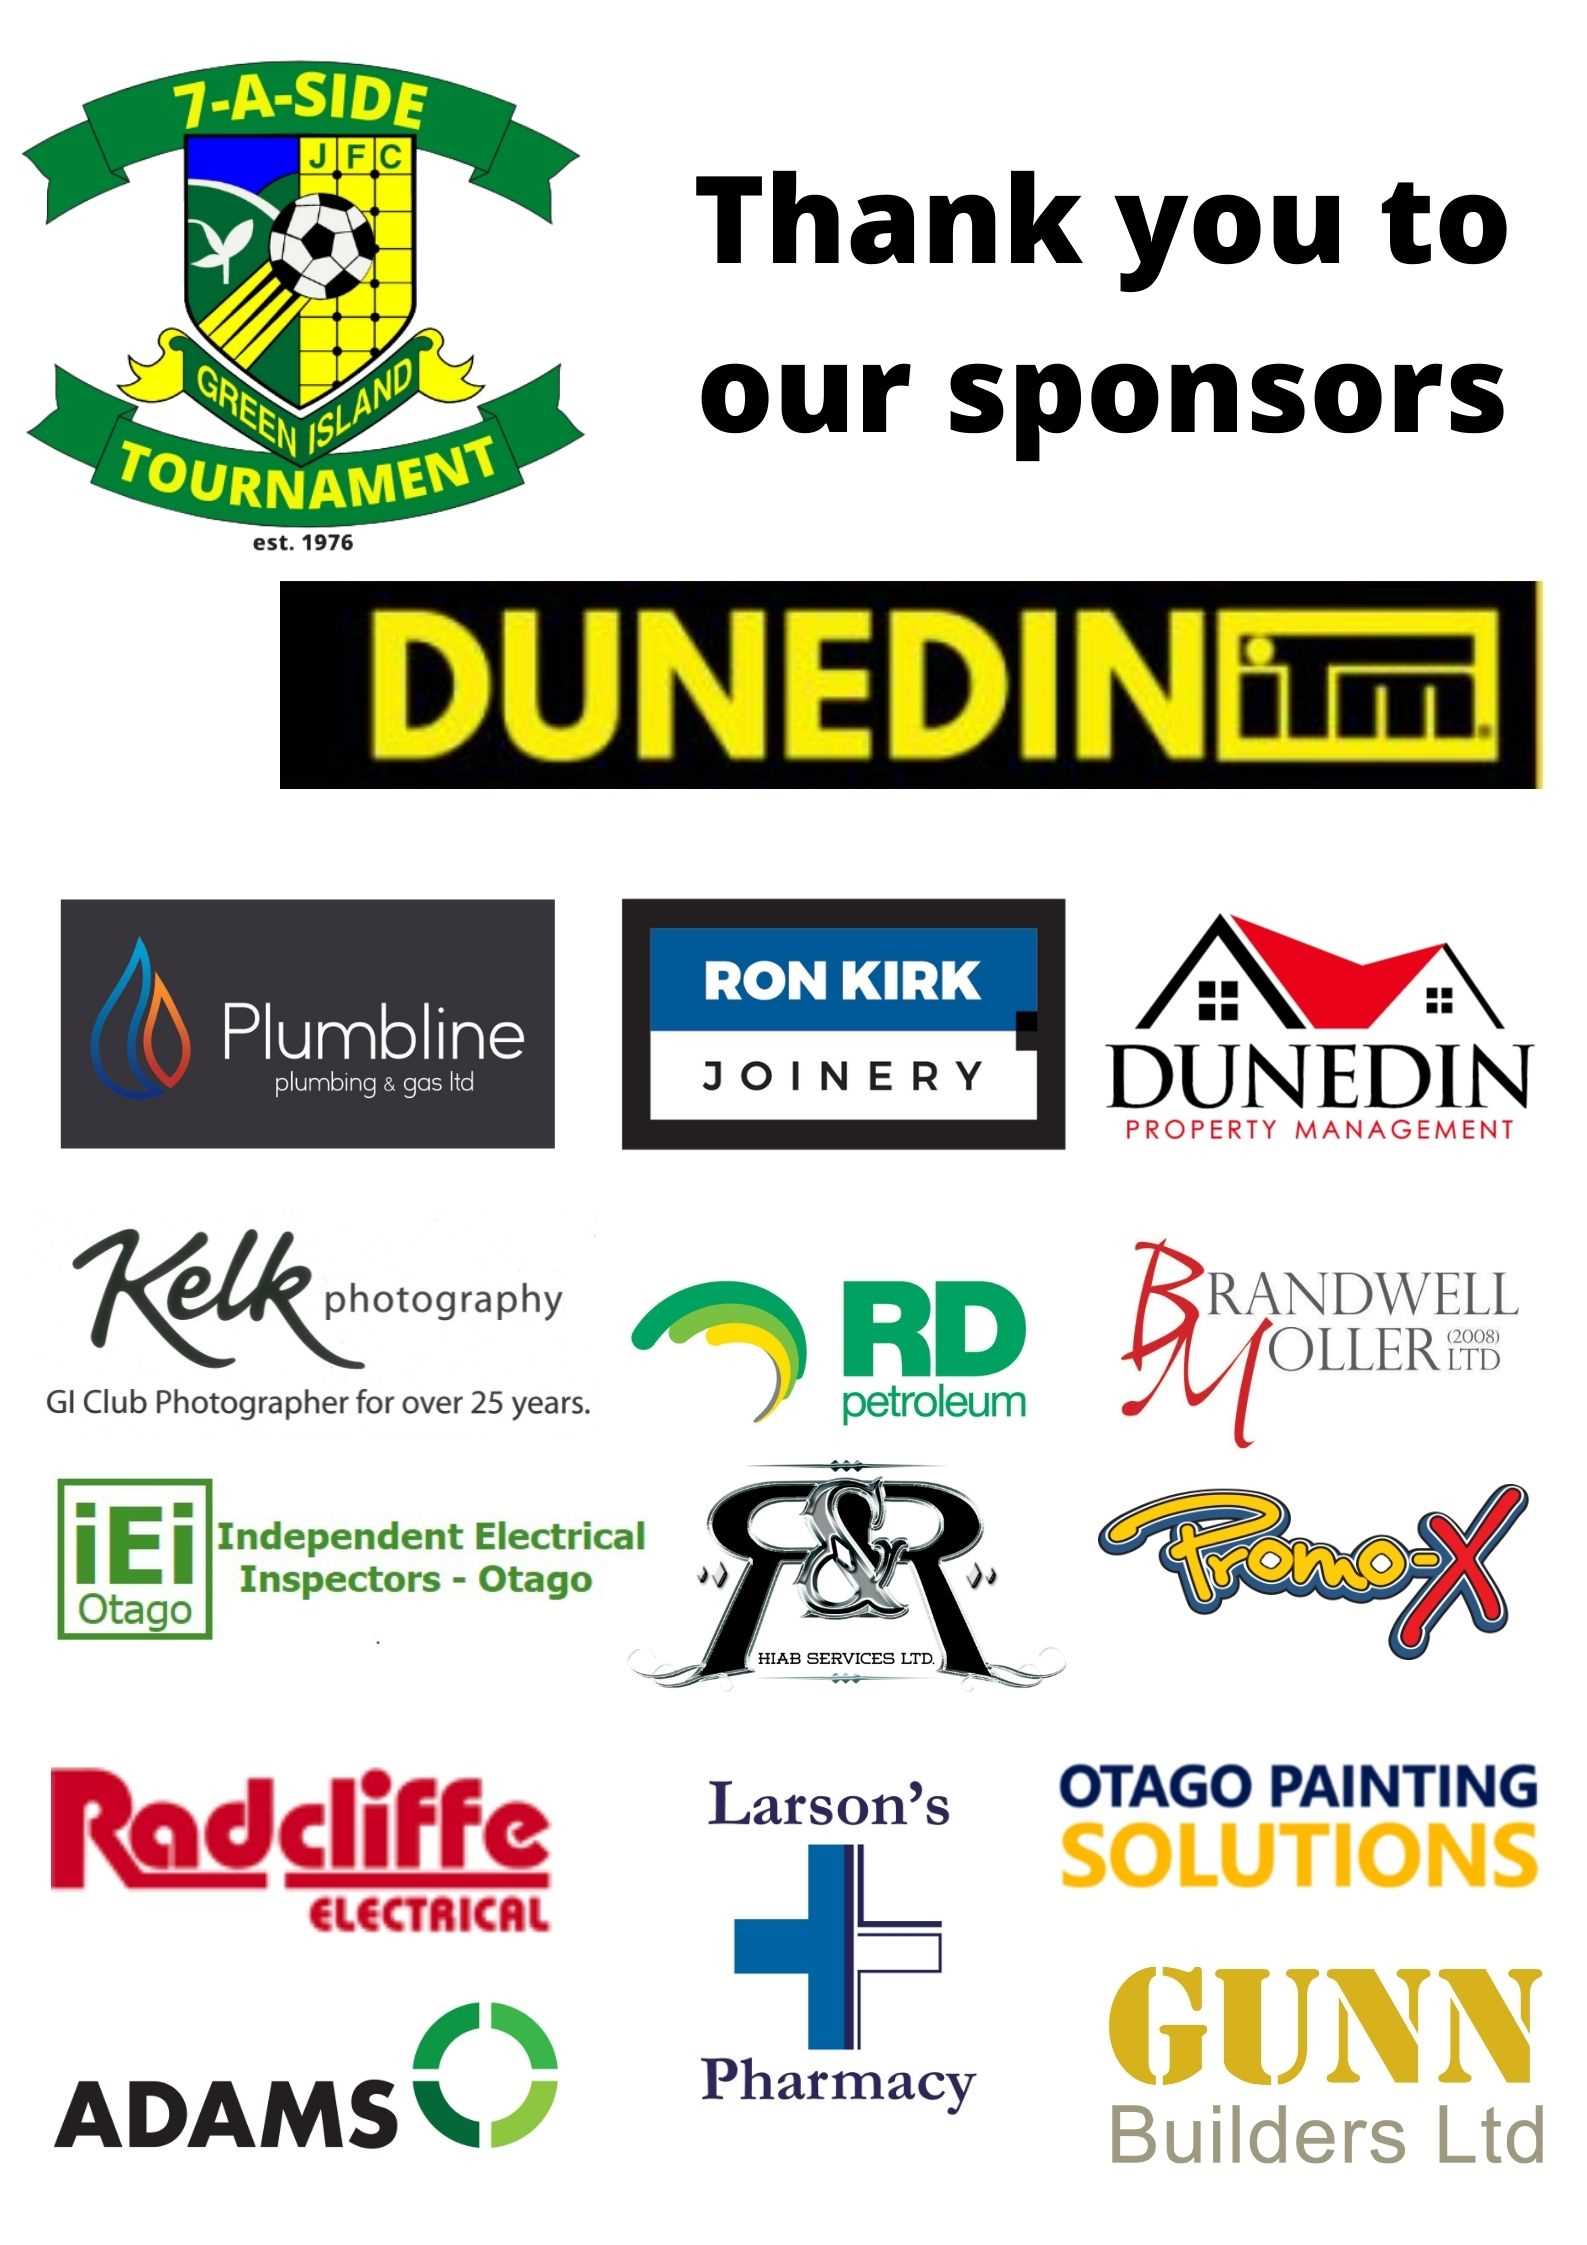 Thank you to our generous sponsors